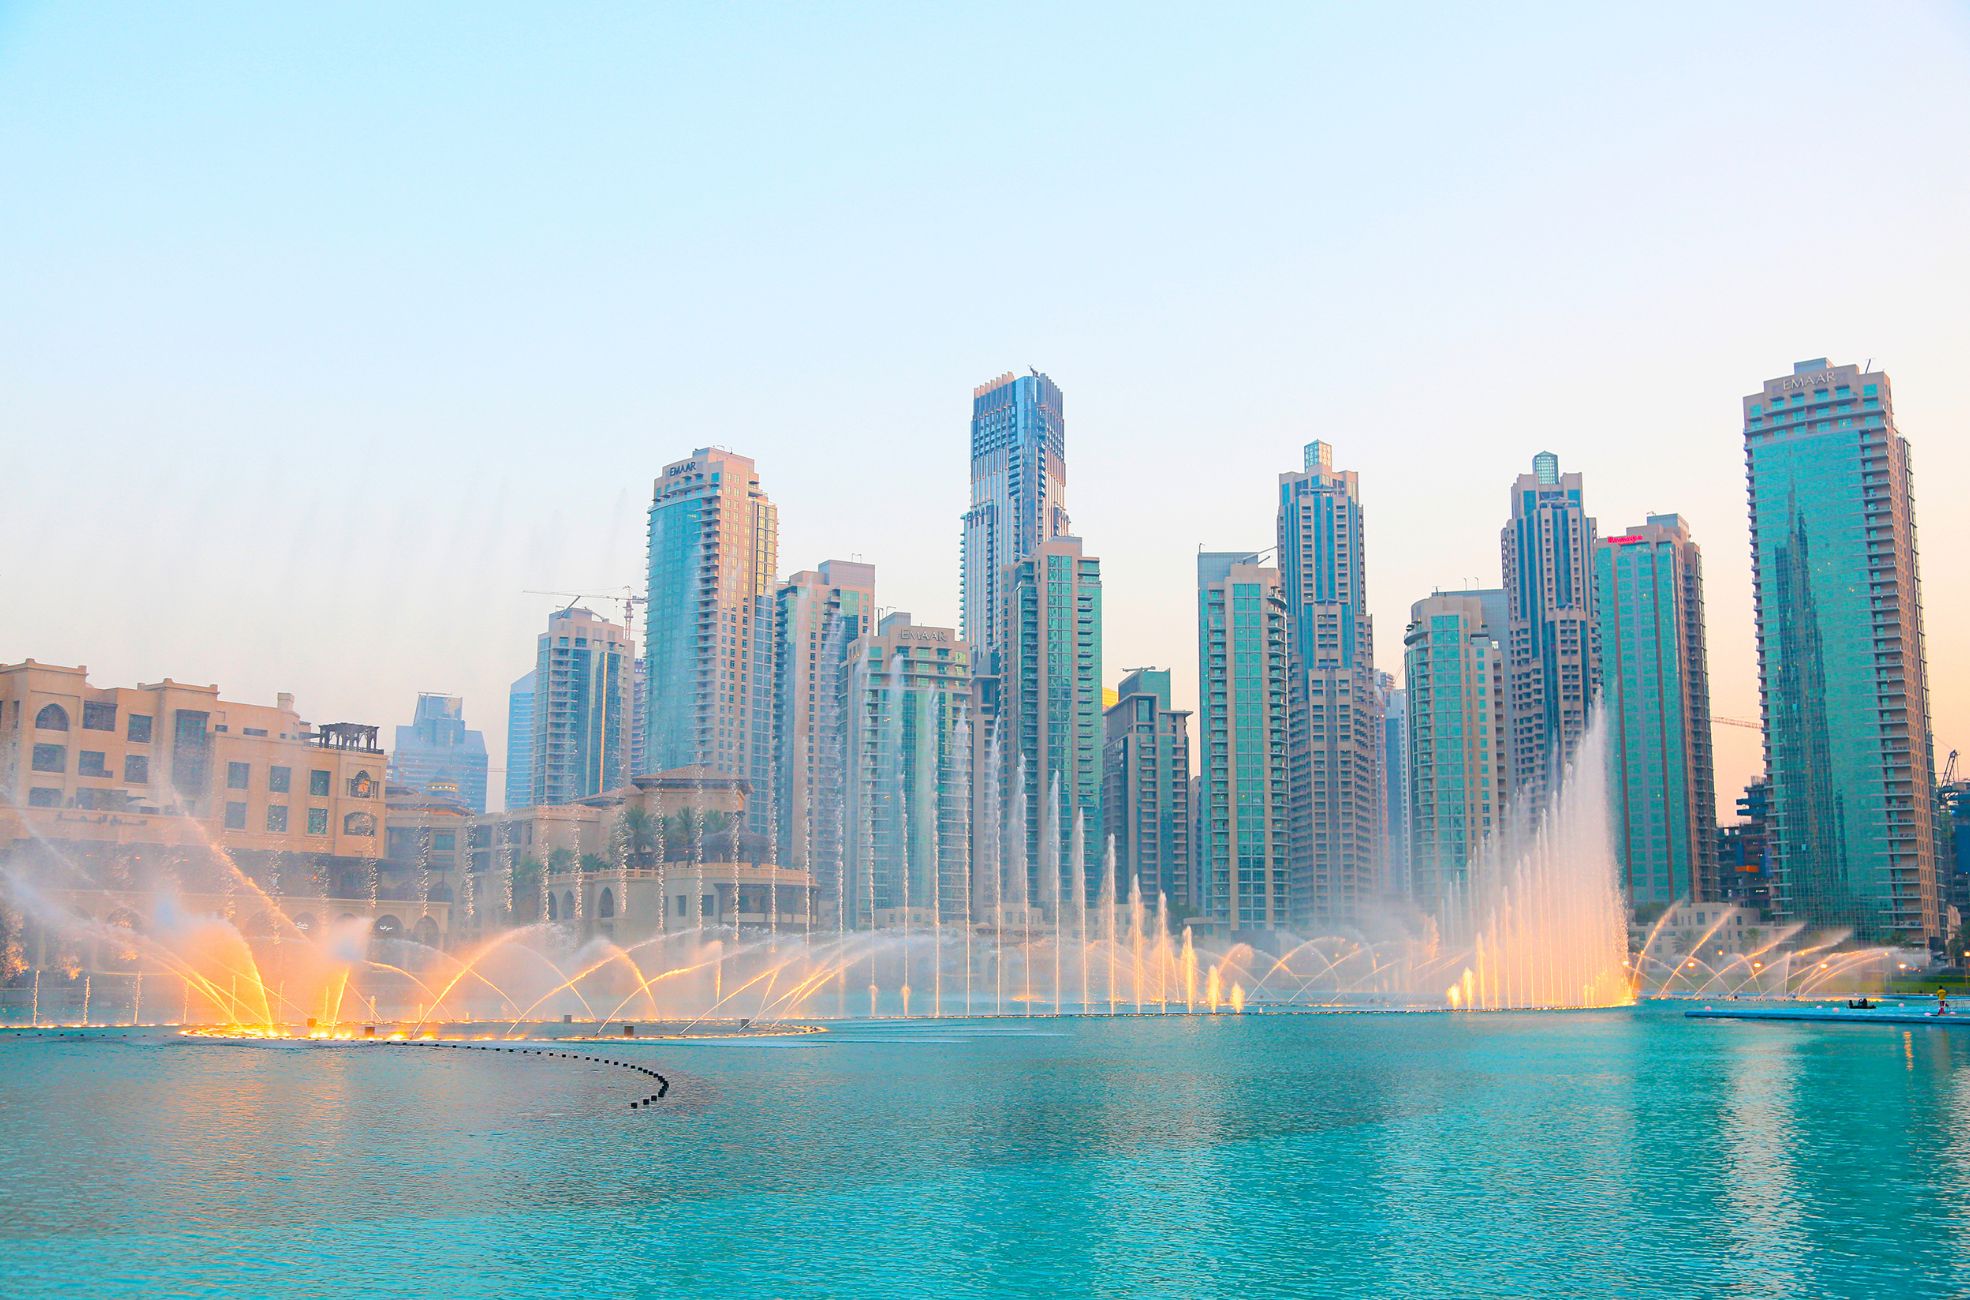 A picture of the fountains in the UAE, with large buildings in the background.